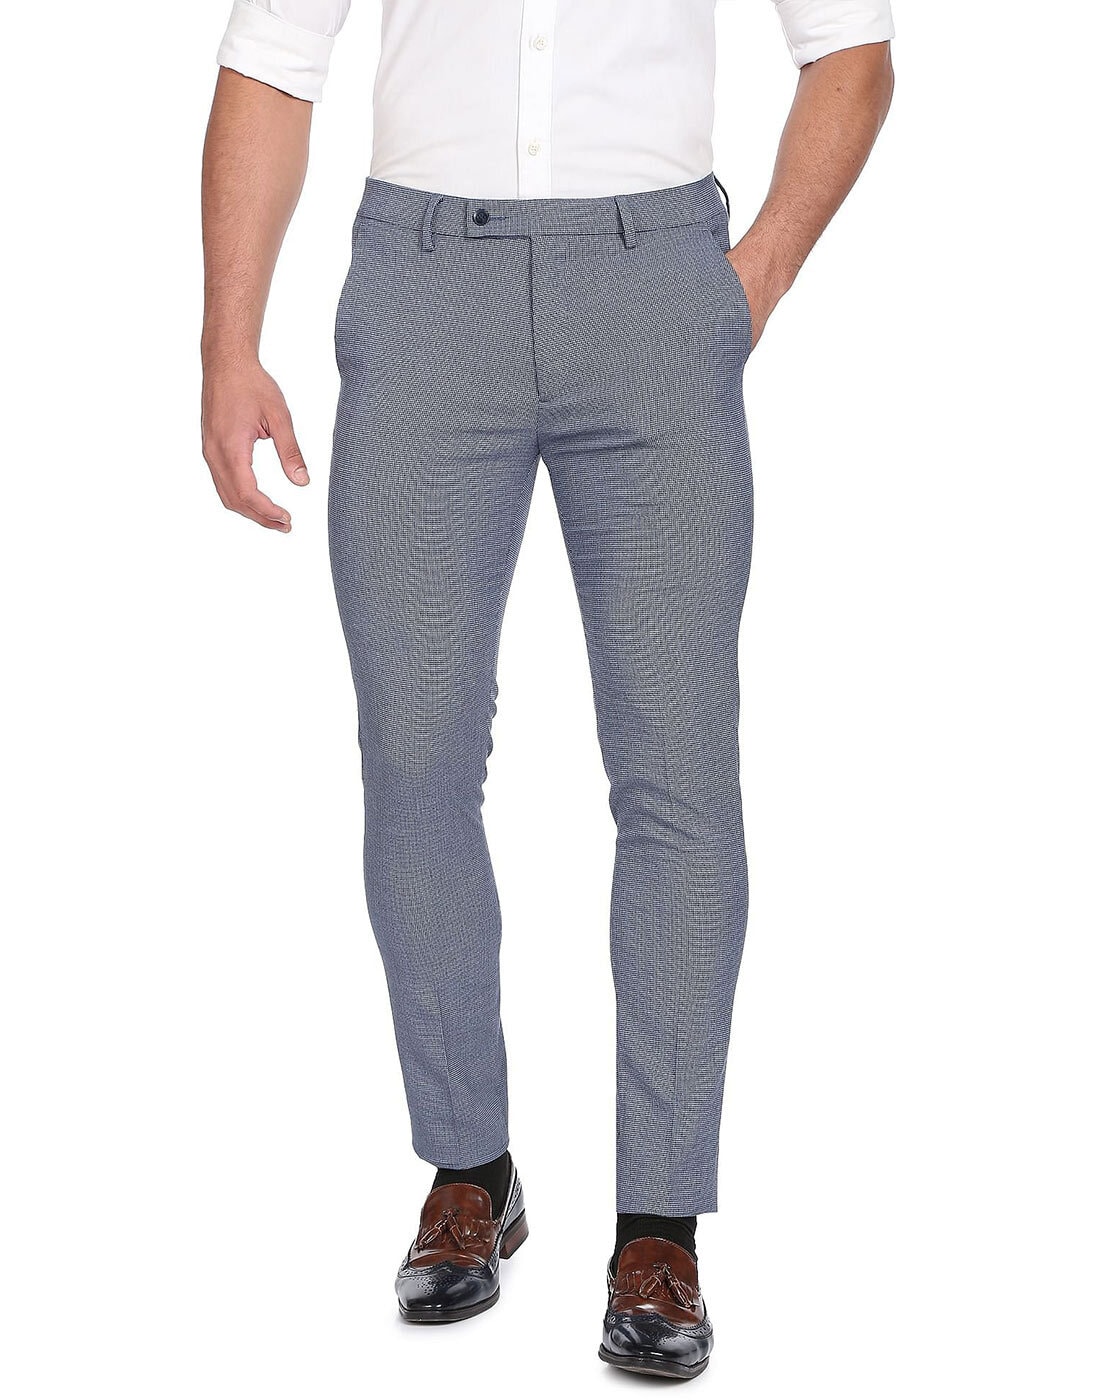 Wool  Mens Trousers Formal Trousers Casual Trousers Slim fit trousers  Cotton Trousers